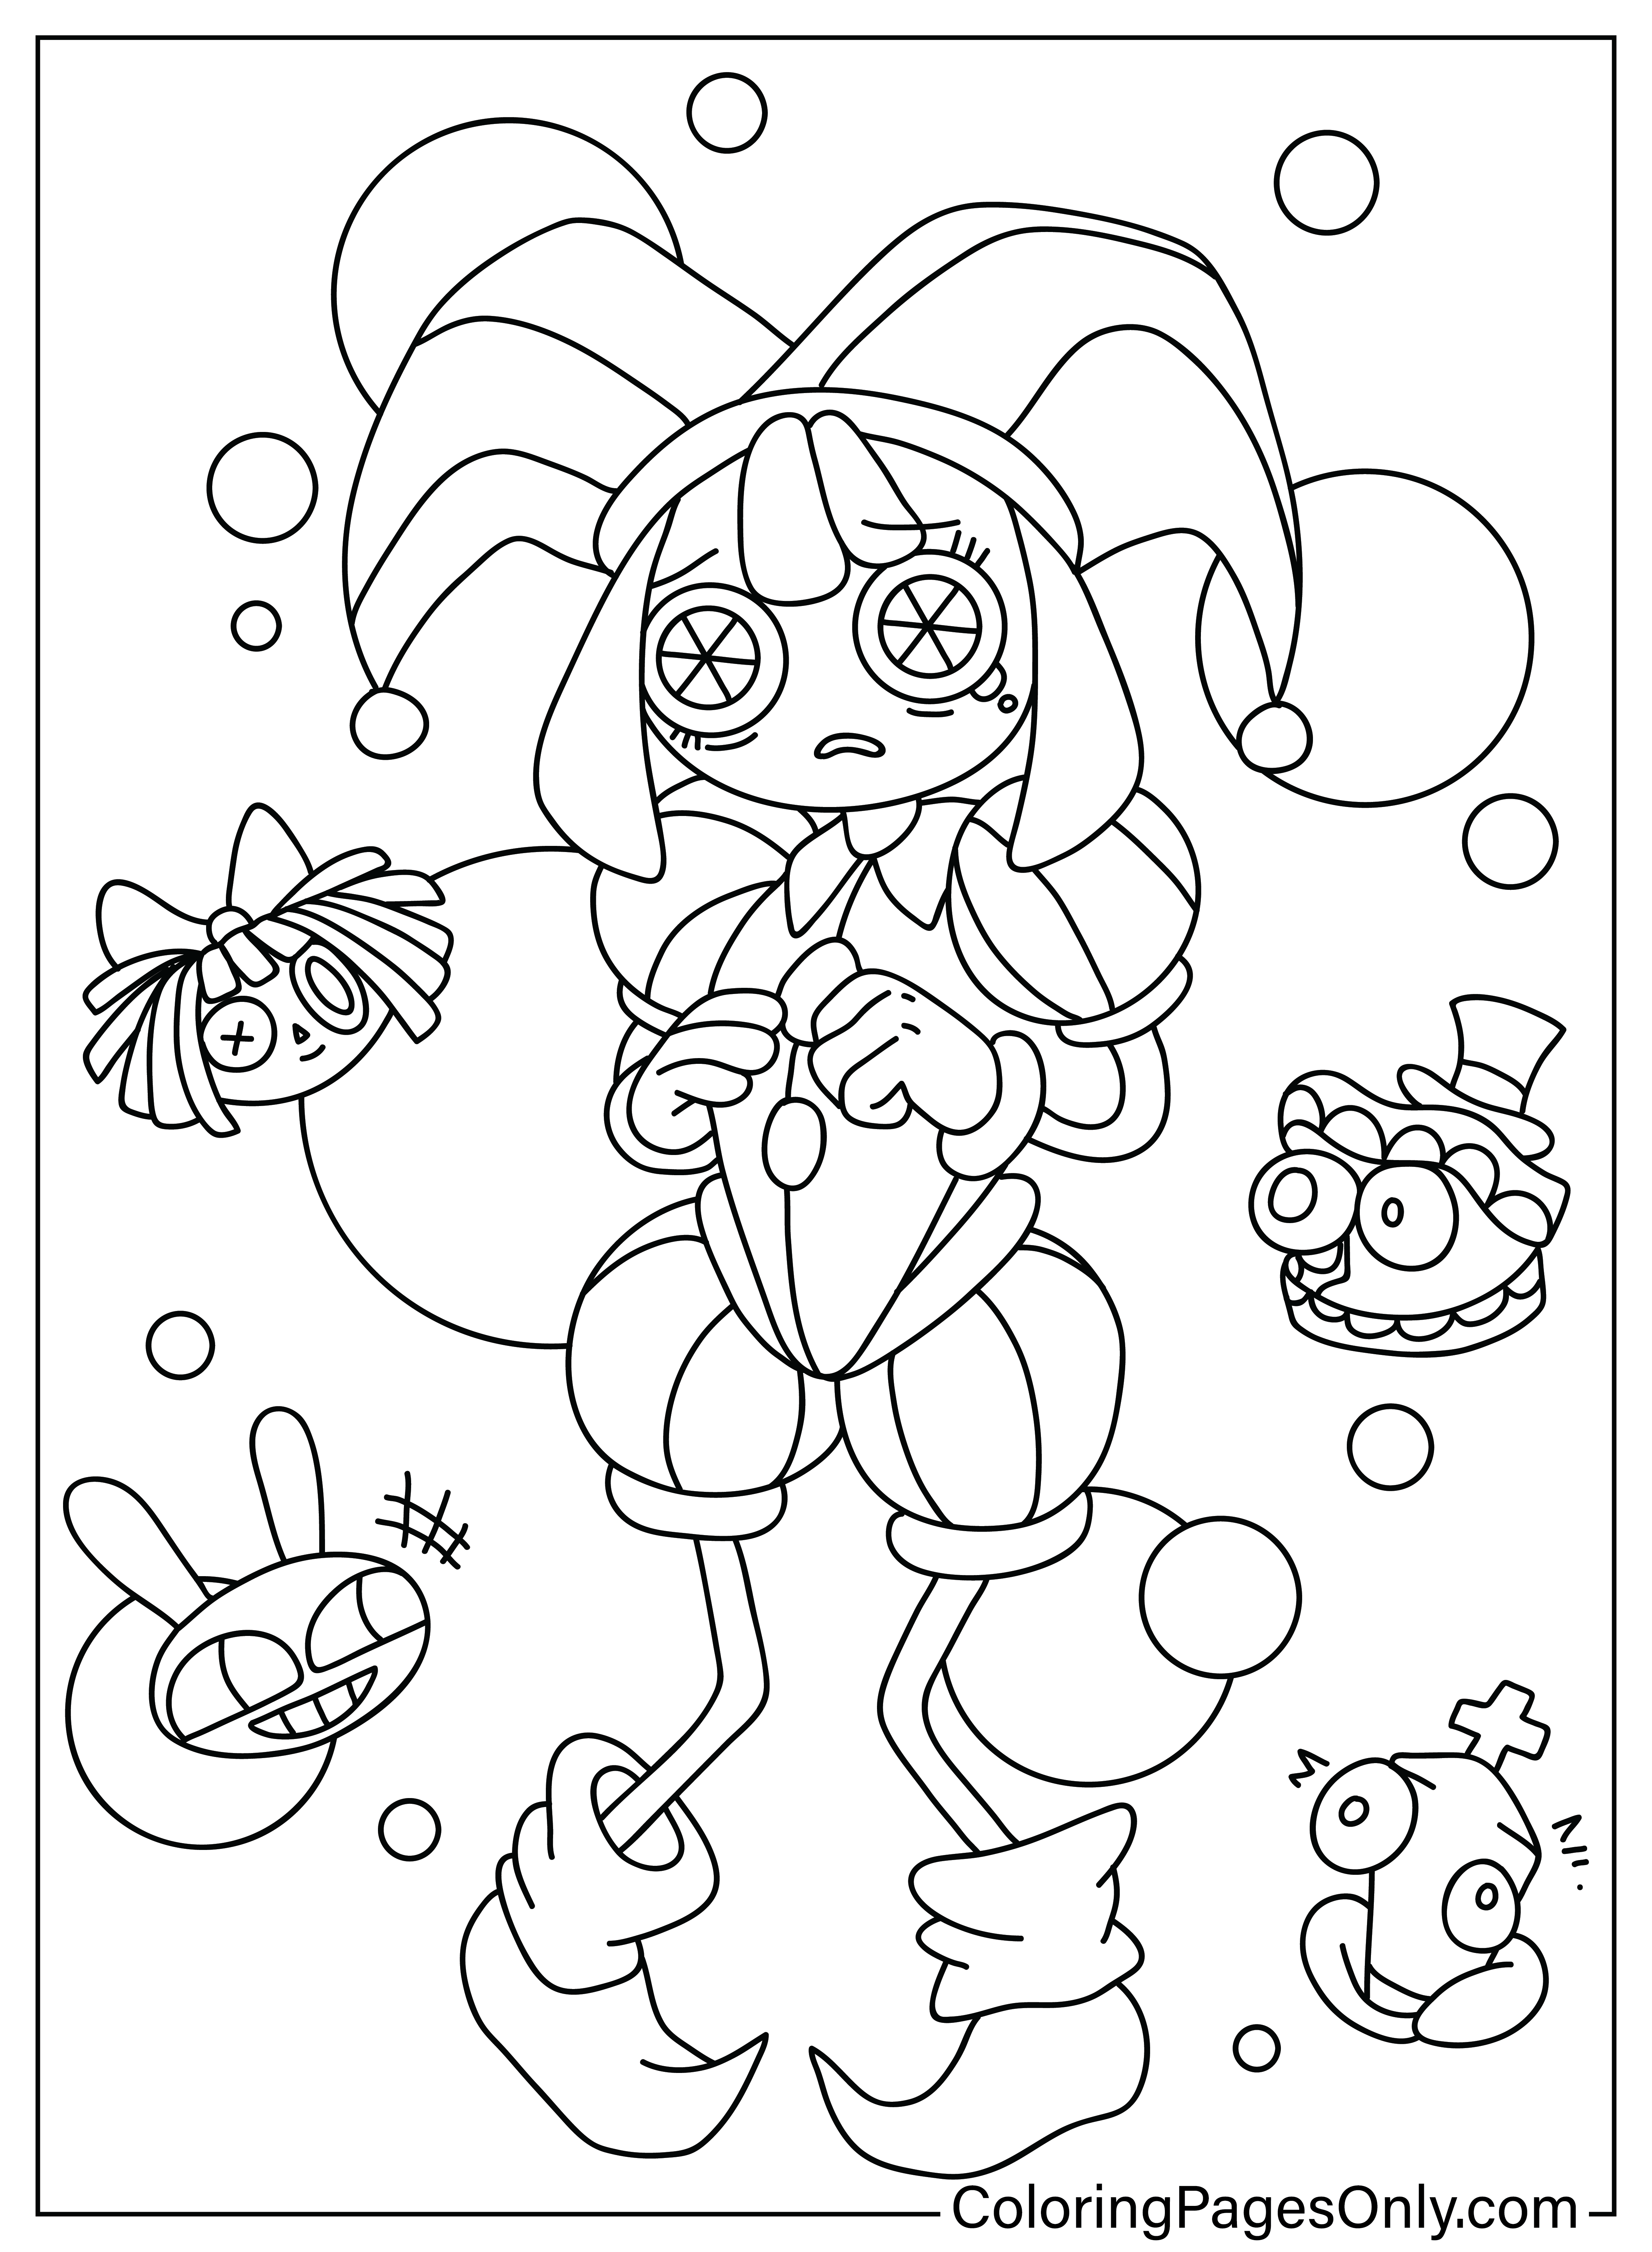 Printable Pomni Coloring Page from The Amazing Digital Circus